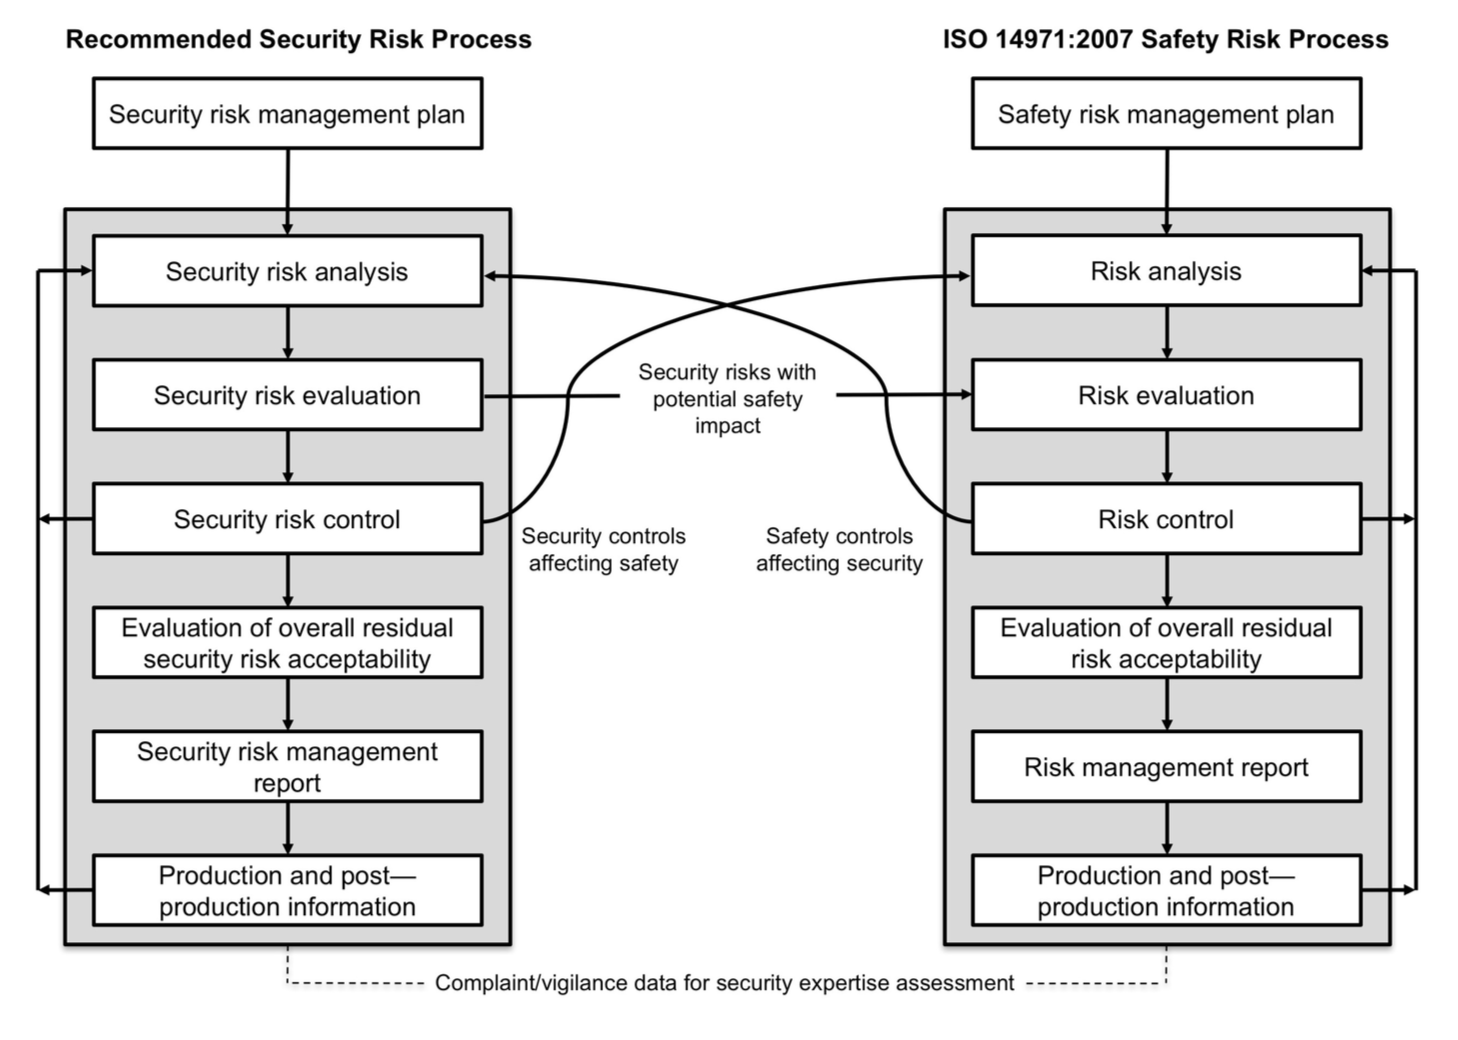 Relationships between the security risk and safety risk management processes